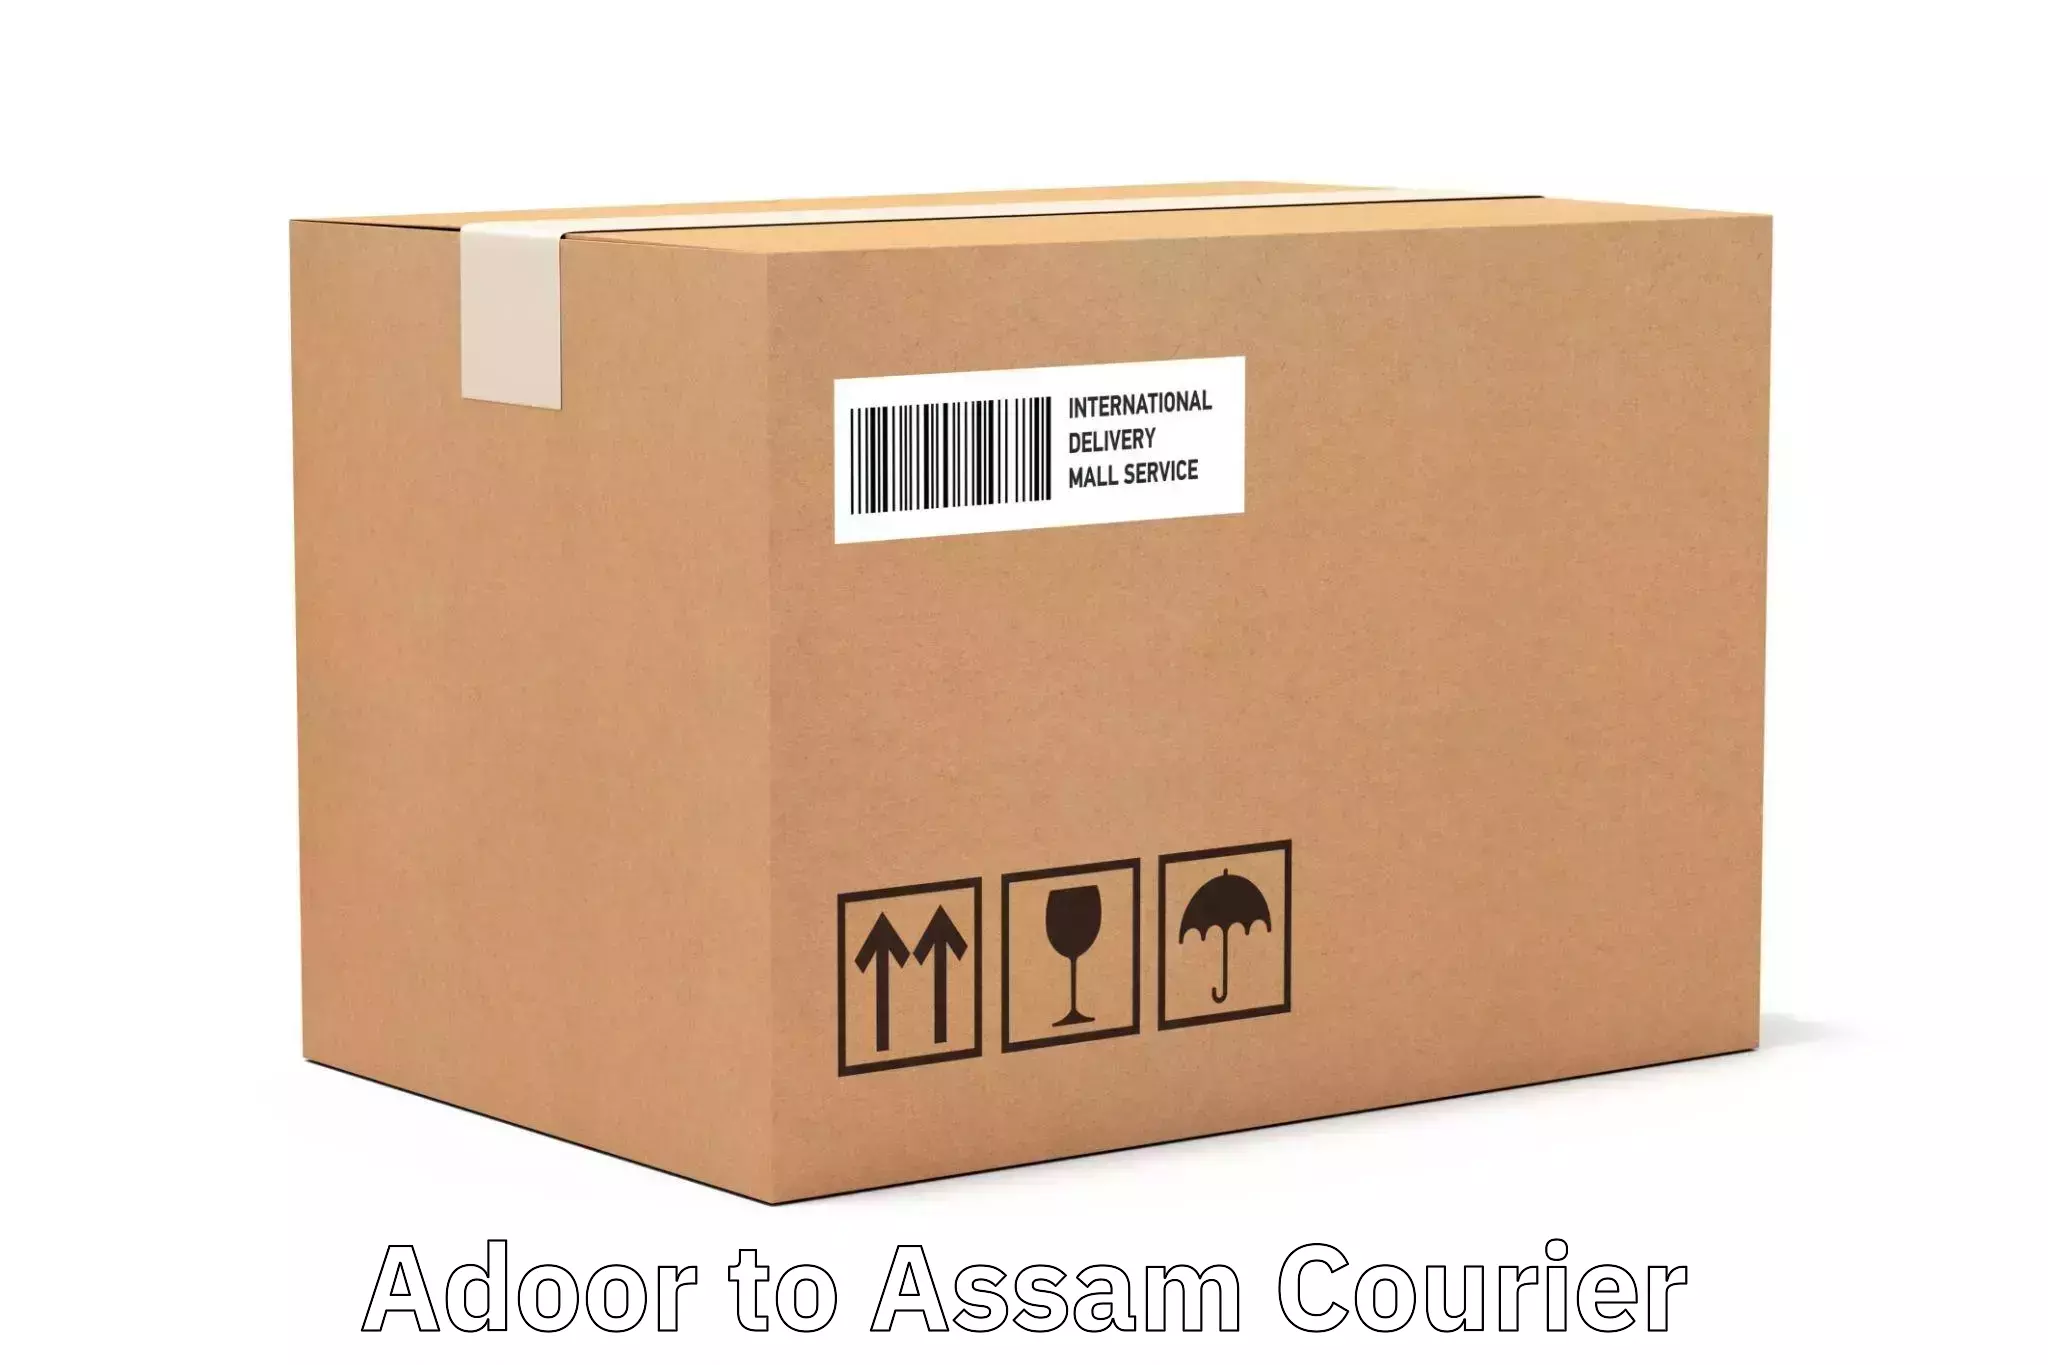 Sustainable courier practices Adoor to Chabua